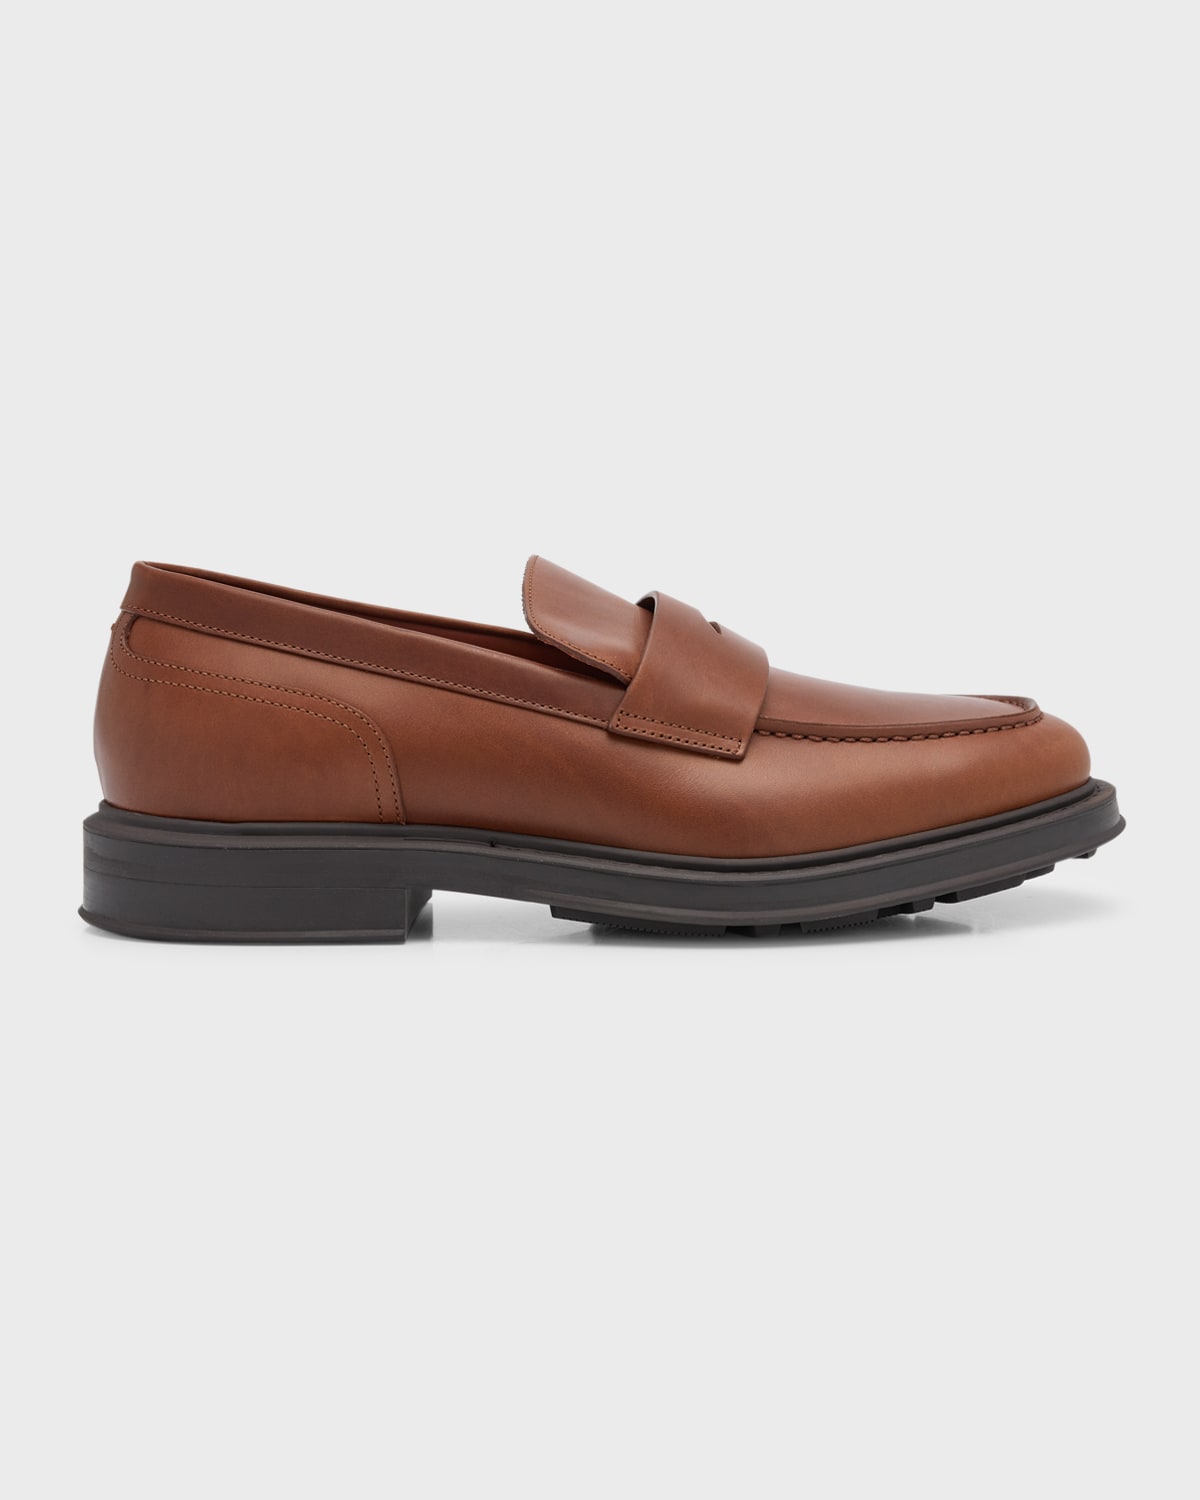 Loro Piana Men's Travis Leather Penny Loafers In H0jc Hbrown